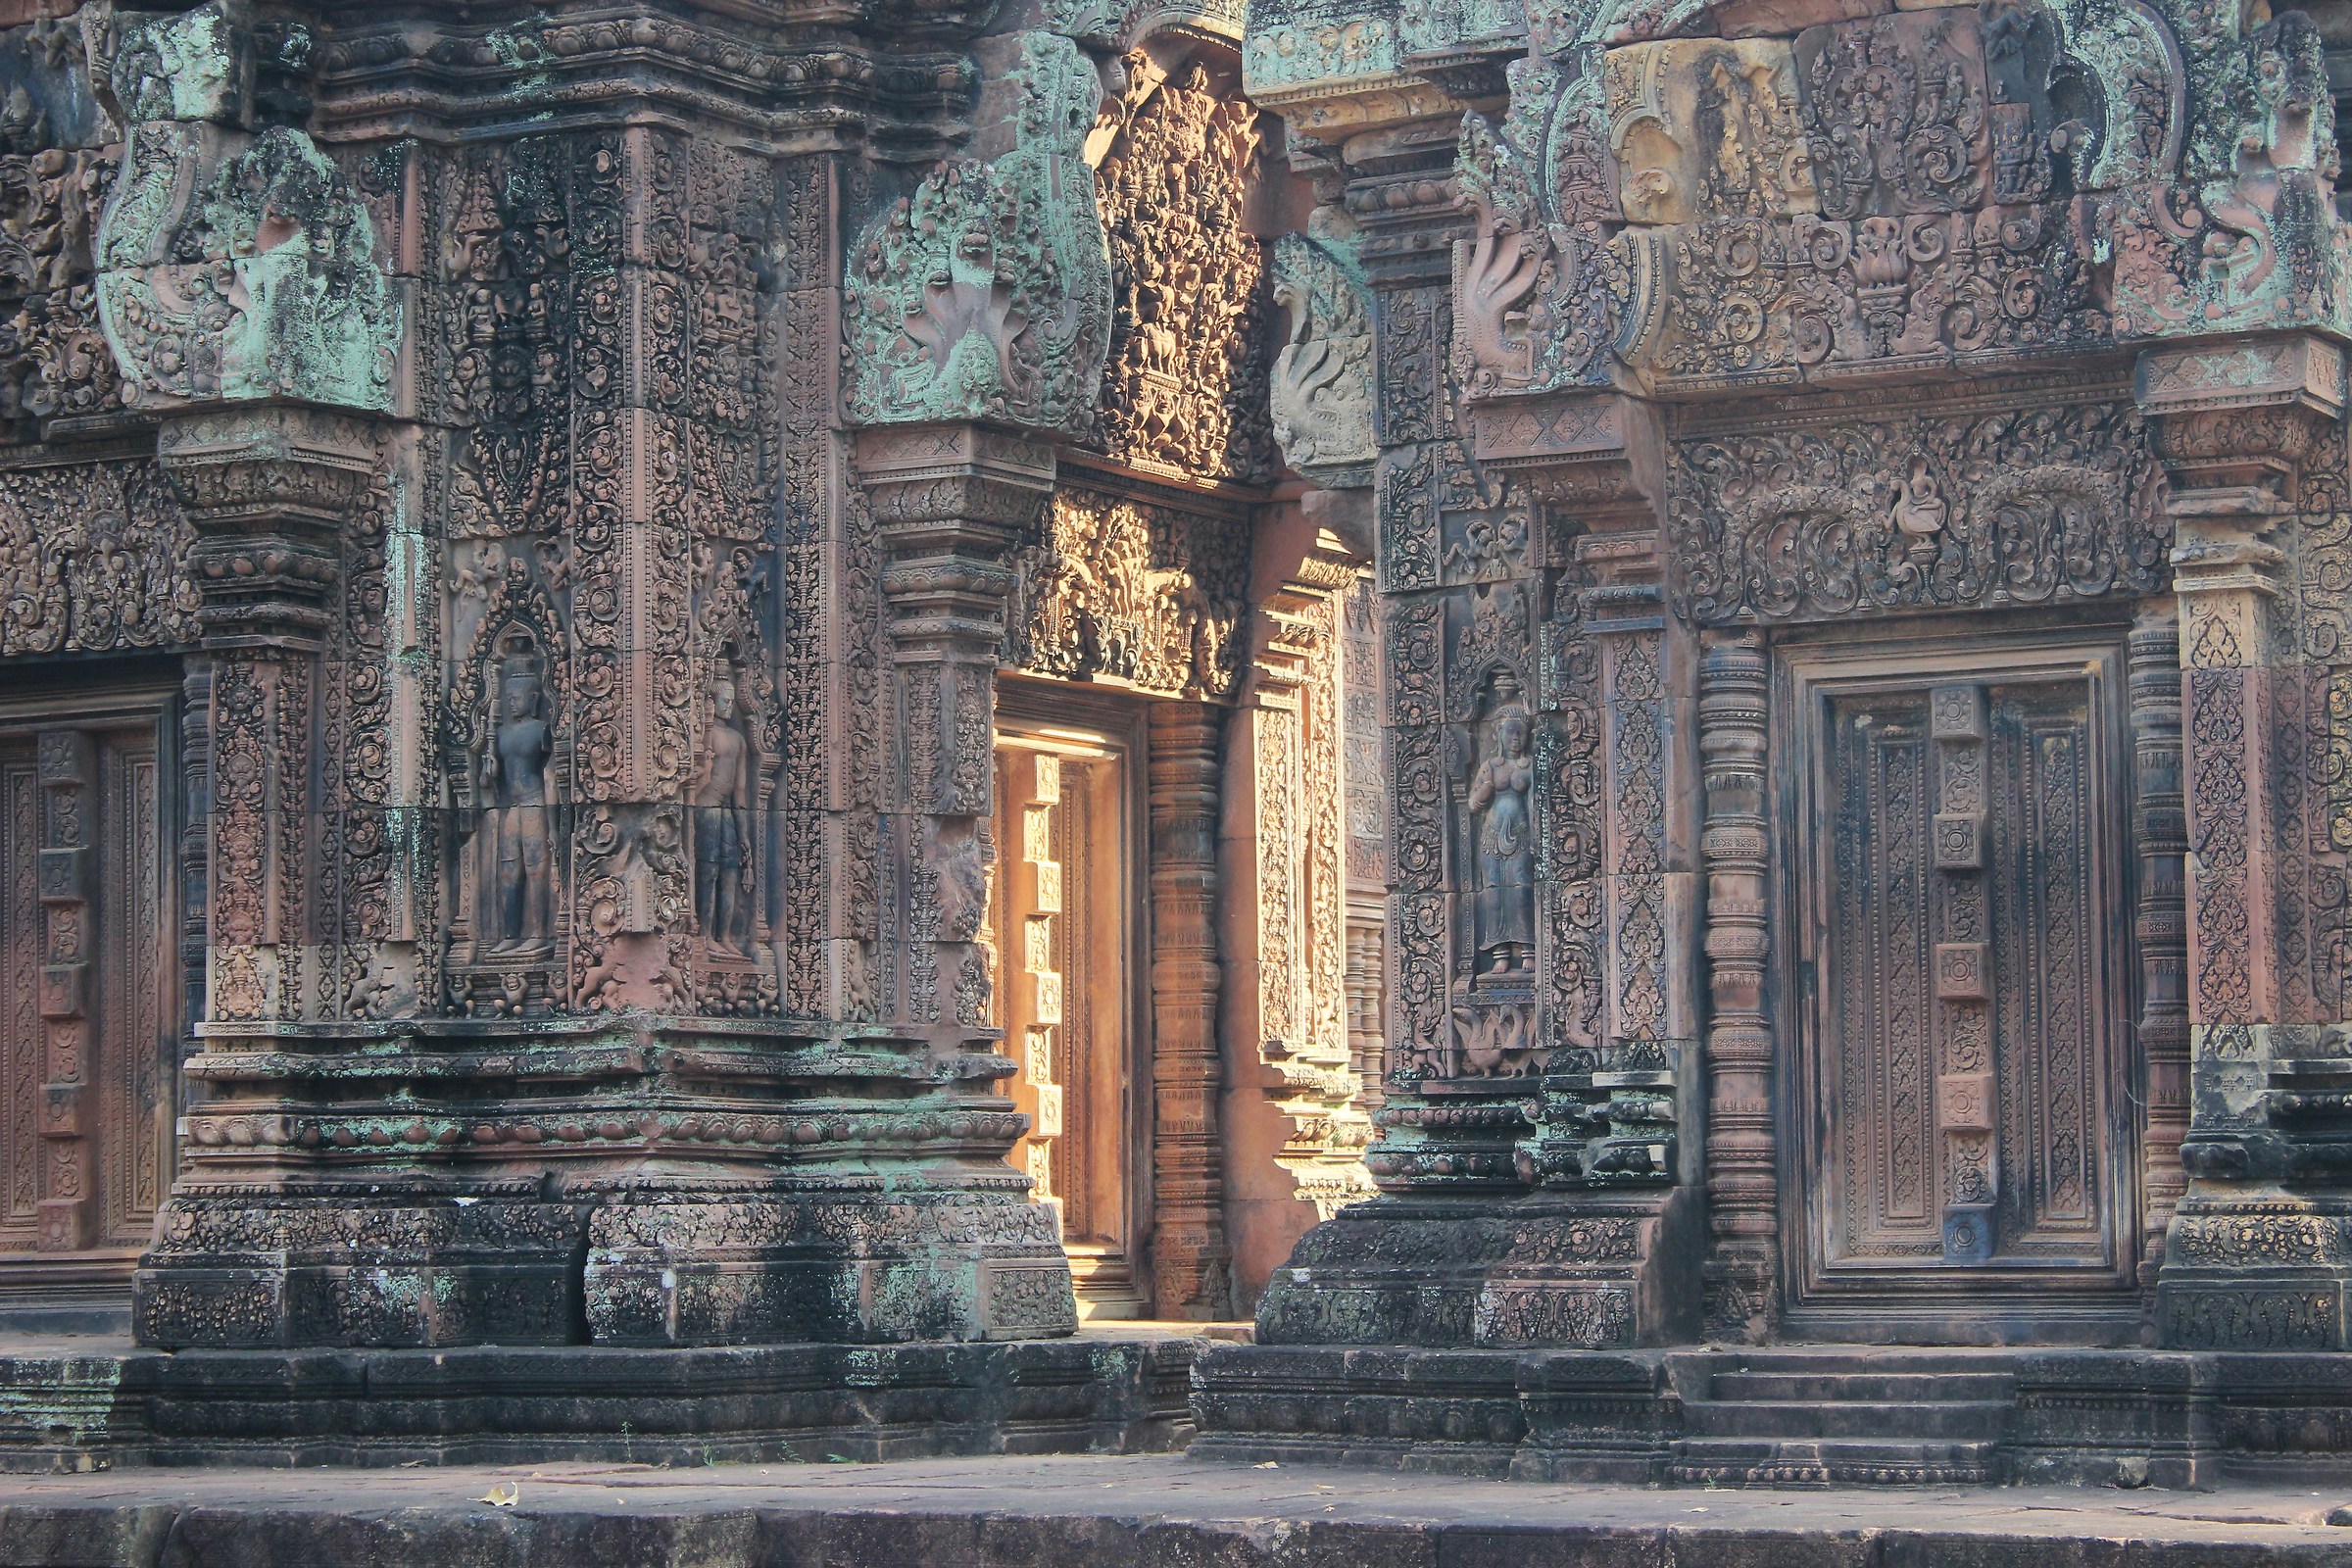 Banteay Srei-The pink temples ...